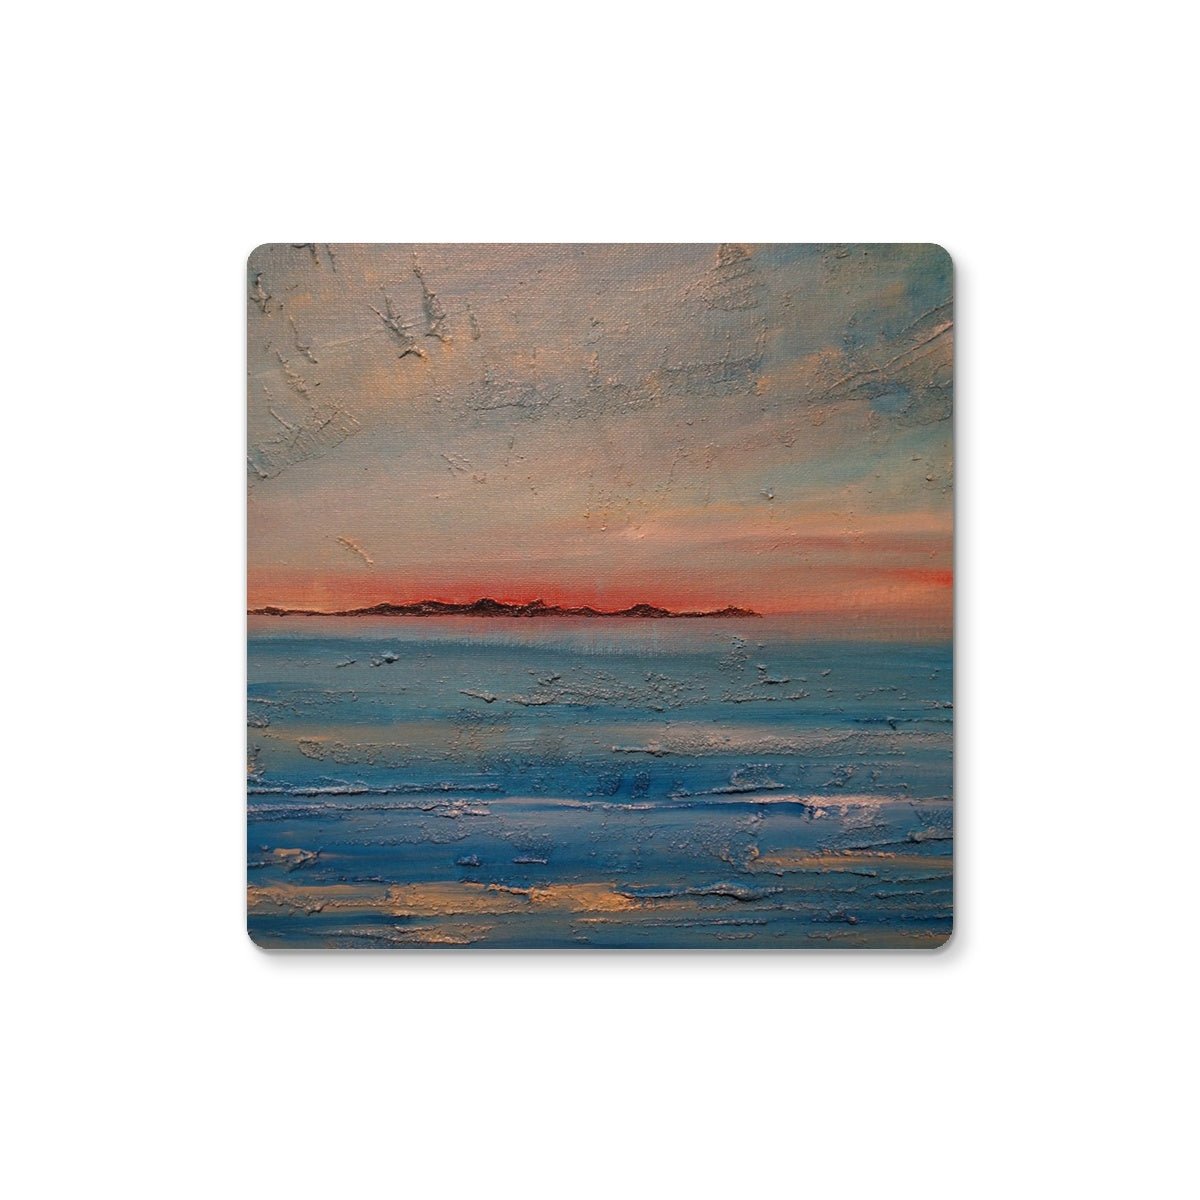 Gigha Sunset Art Gifts Coaster-Coasters-Hebridean Islands Art Gallery-2 Coasters-Paintings, Prints, Homeware, Art Gifts From Scotland By Scottish Artist Kevin Hunter